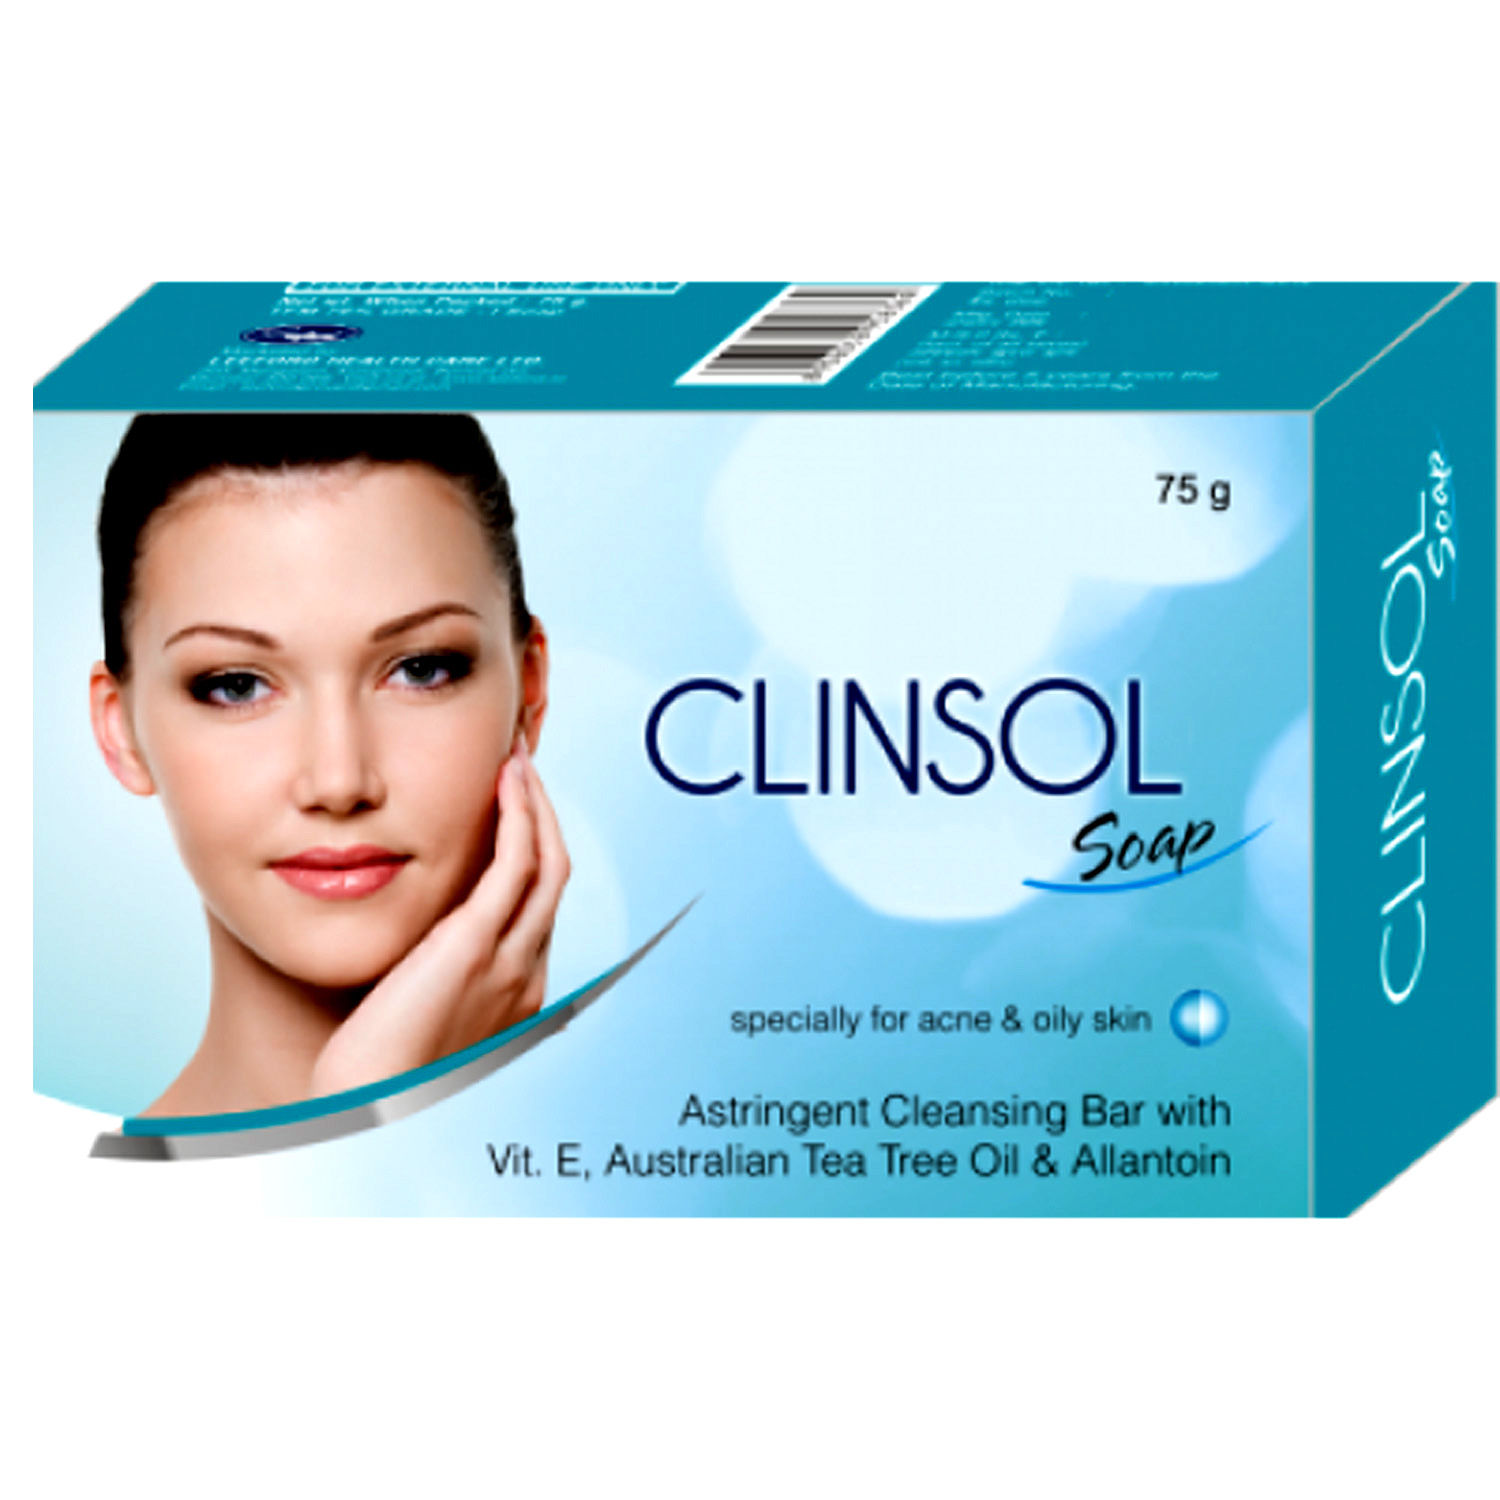 Clinsol Soap, 75 gm, Pack of 1 